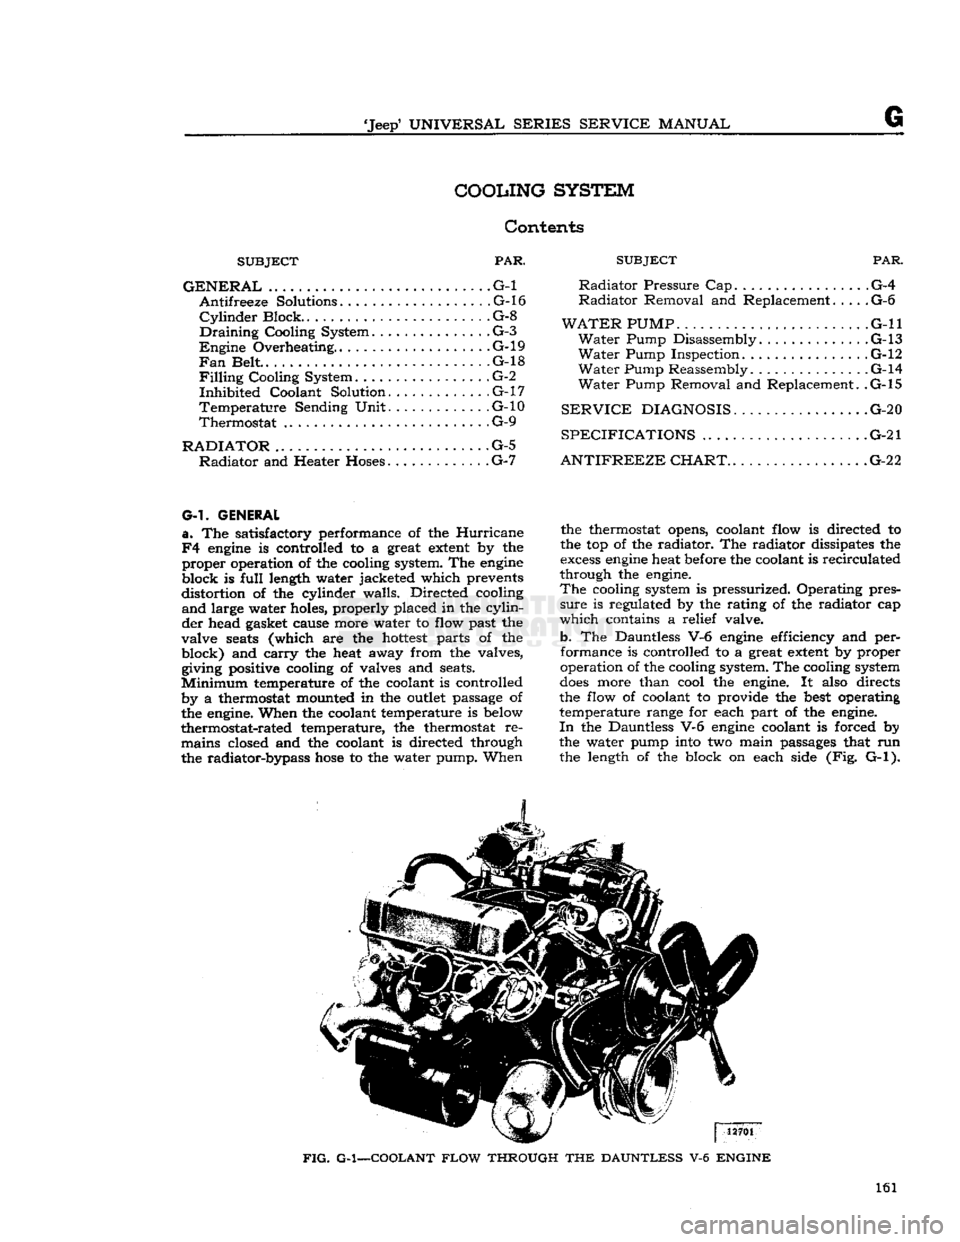 JEEP CJ 1953  Service Manual 
Jeep*
 UNIVERSAL
 SERIES
 SERVICE
 MANUAL 

COOLING
 SYSTEM 

Contents 

SUBJECT
 PAR. 

GENERAL
 .G-l  Antifreeze Solutions. .G-l6 
Cylinder
 Block.
 ..................
 .G-8 

Draining
 Cooling Sy